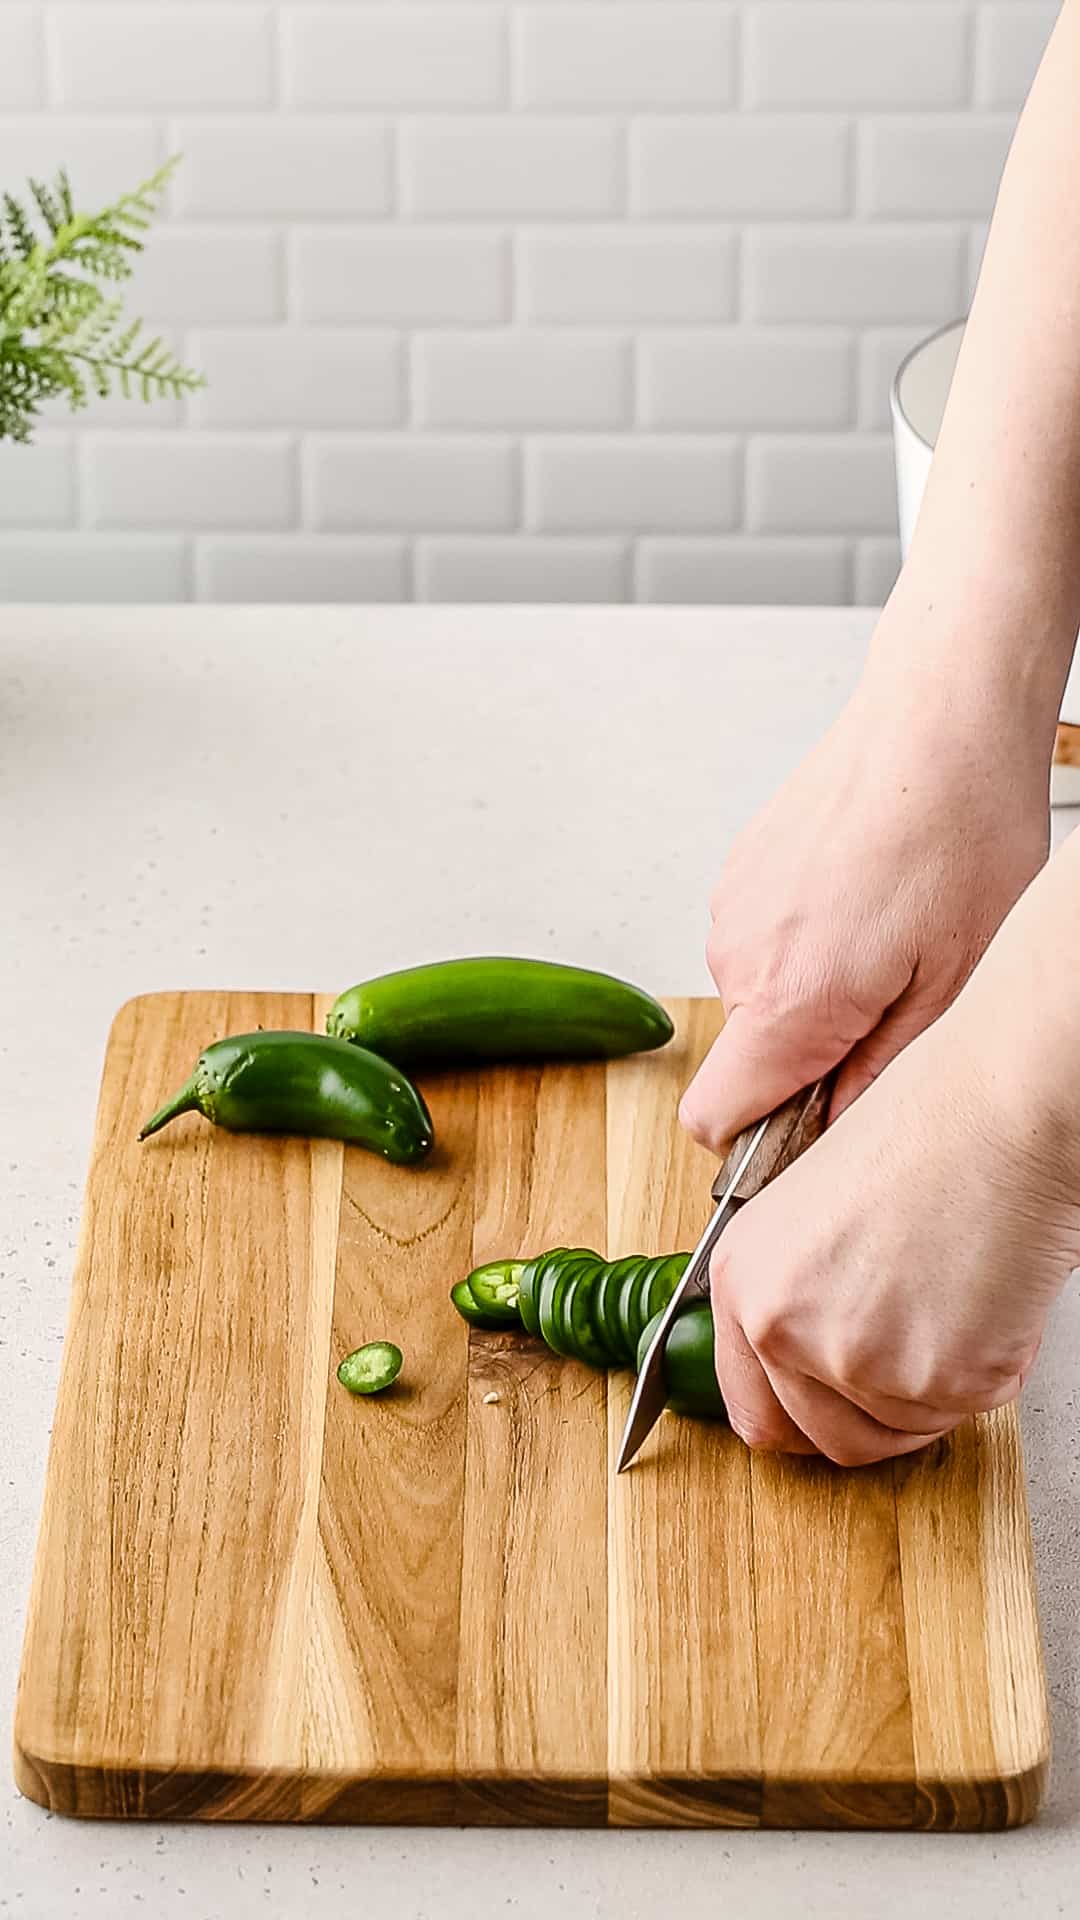 Hands cutting up jalapeno peppers.